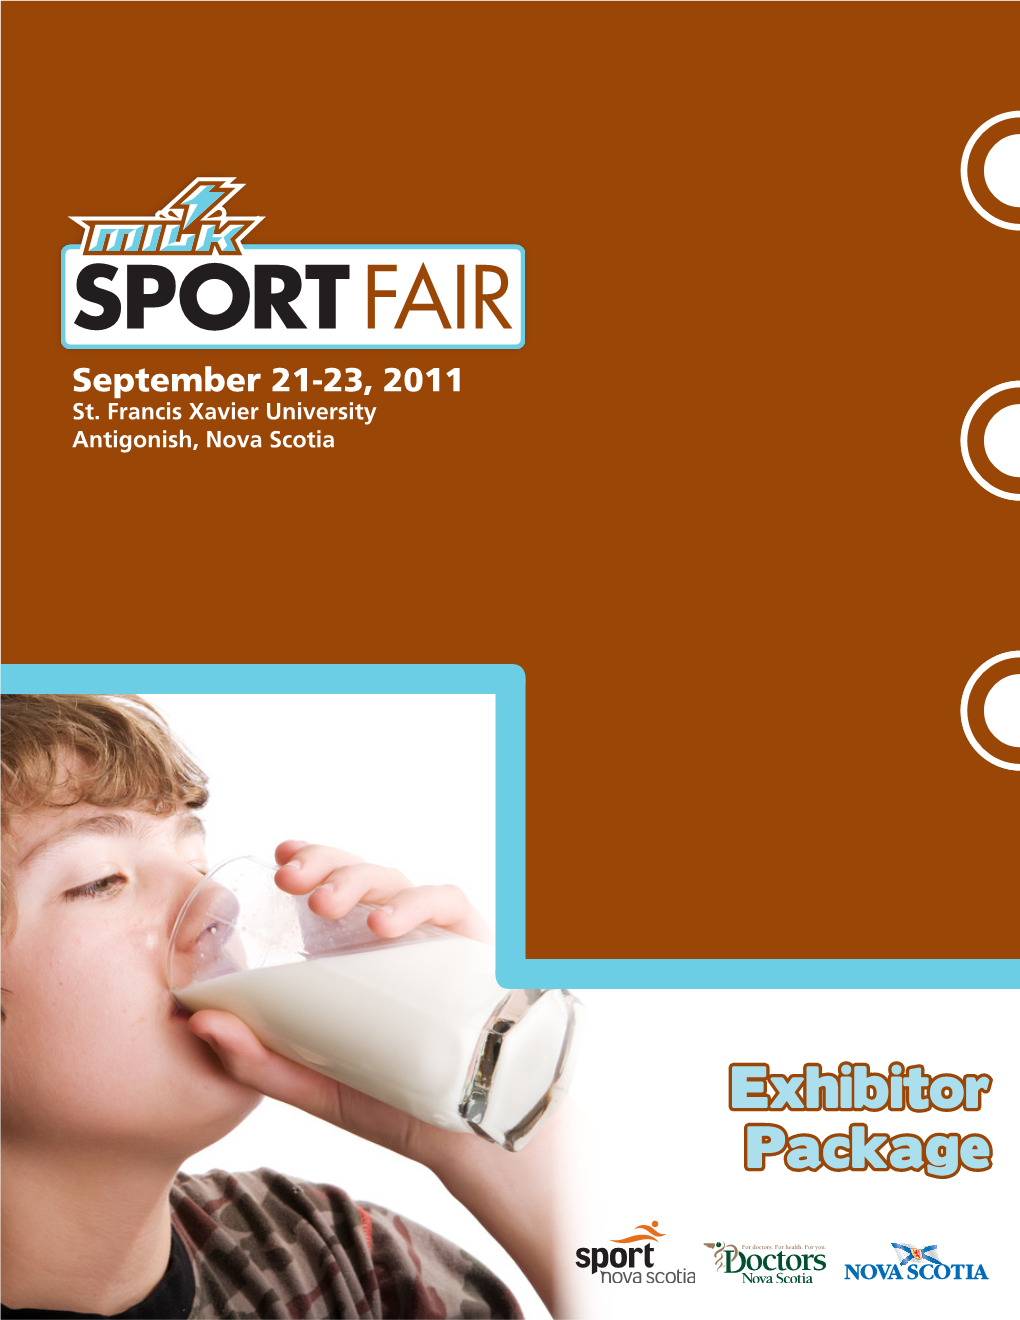 Exhibitor Package What Is the Milk Sport Fair?